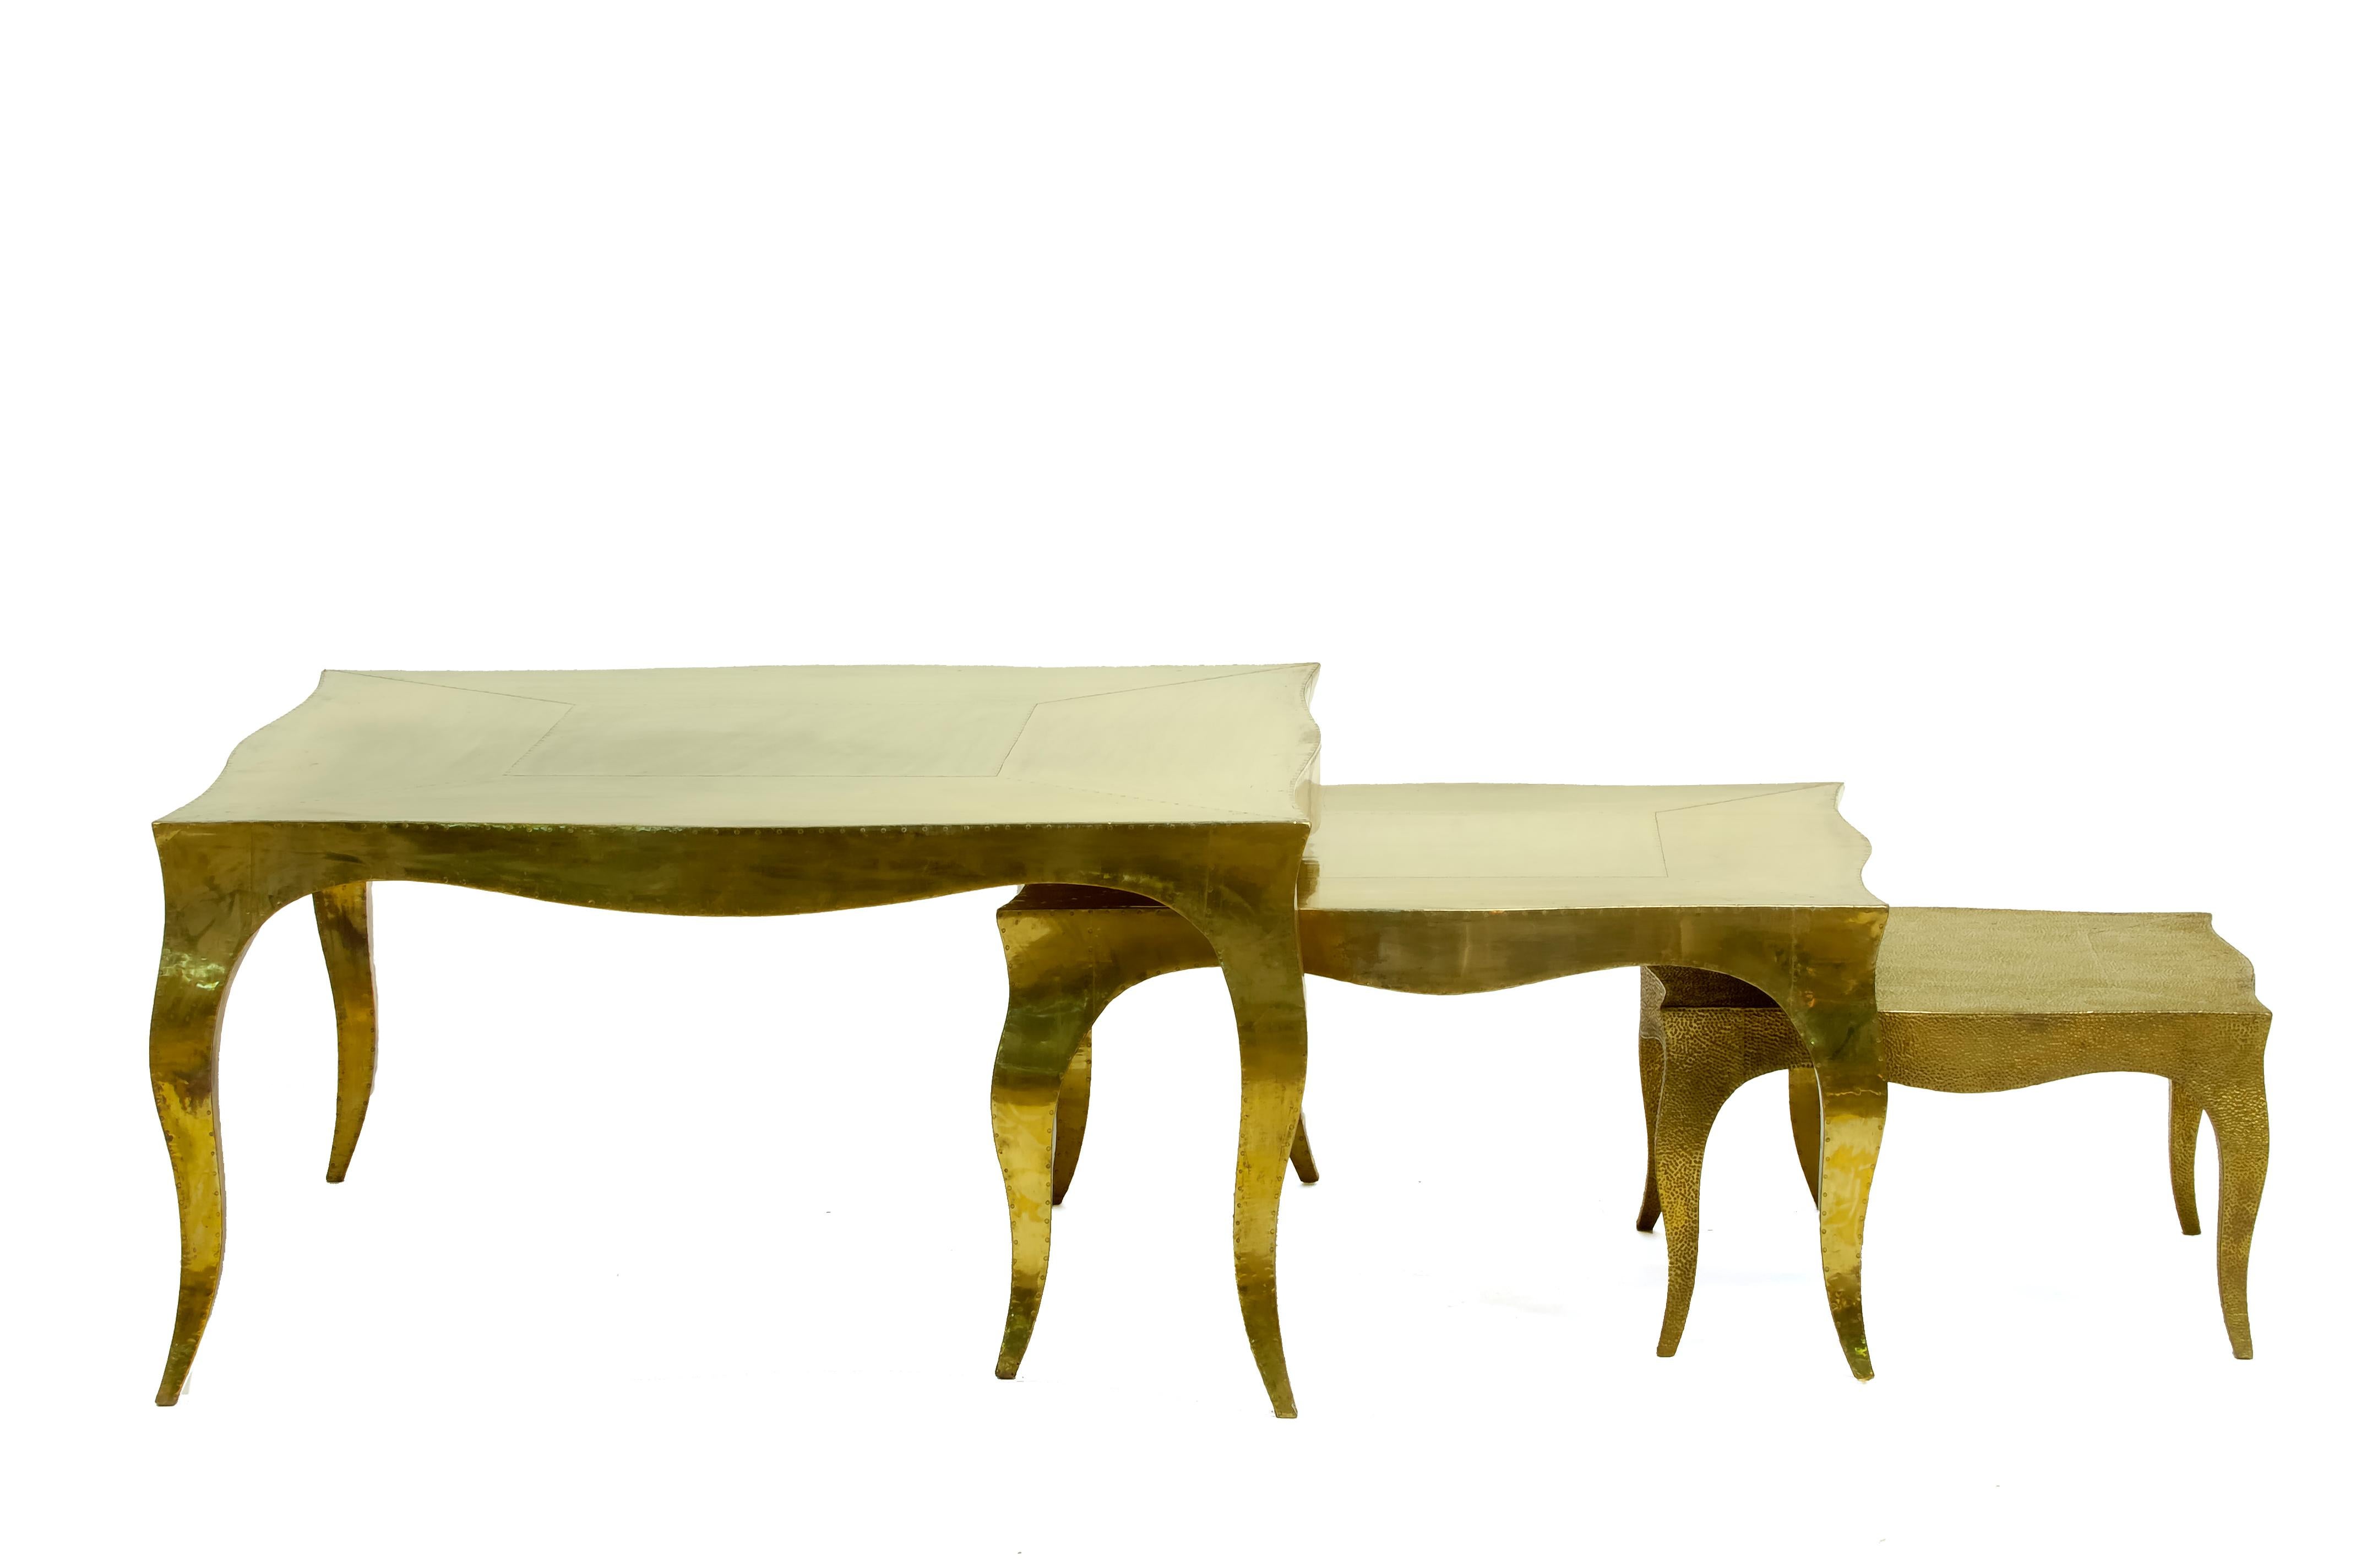 Louise Art Deco Industrial and Work Tables Mid. Hammered White Bronze by Paul Ma For Sale 8